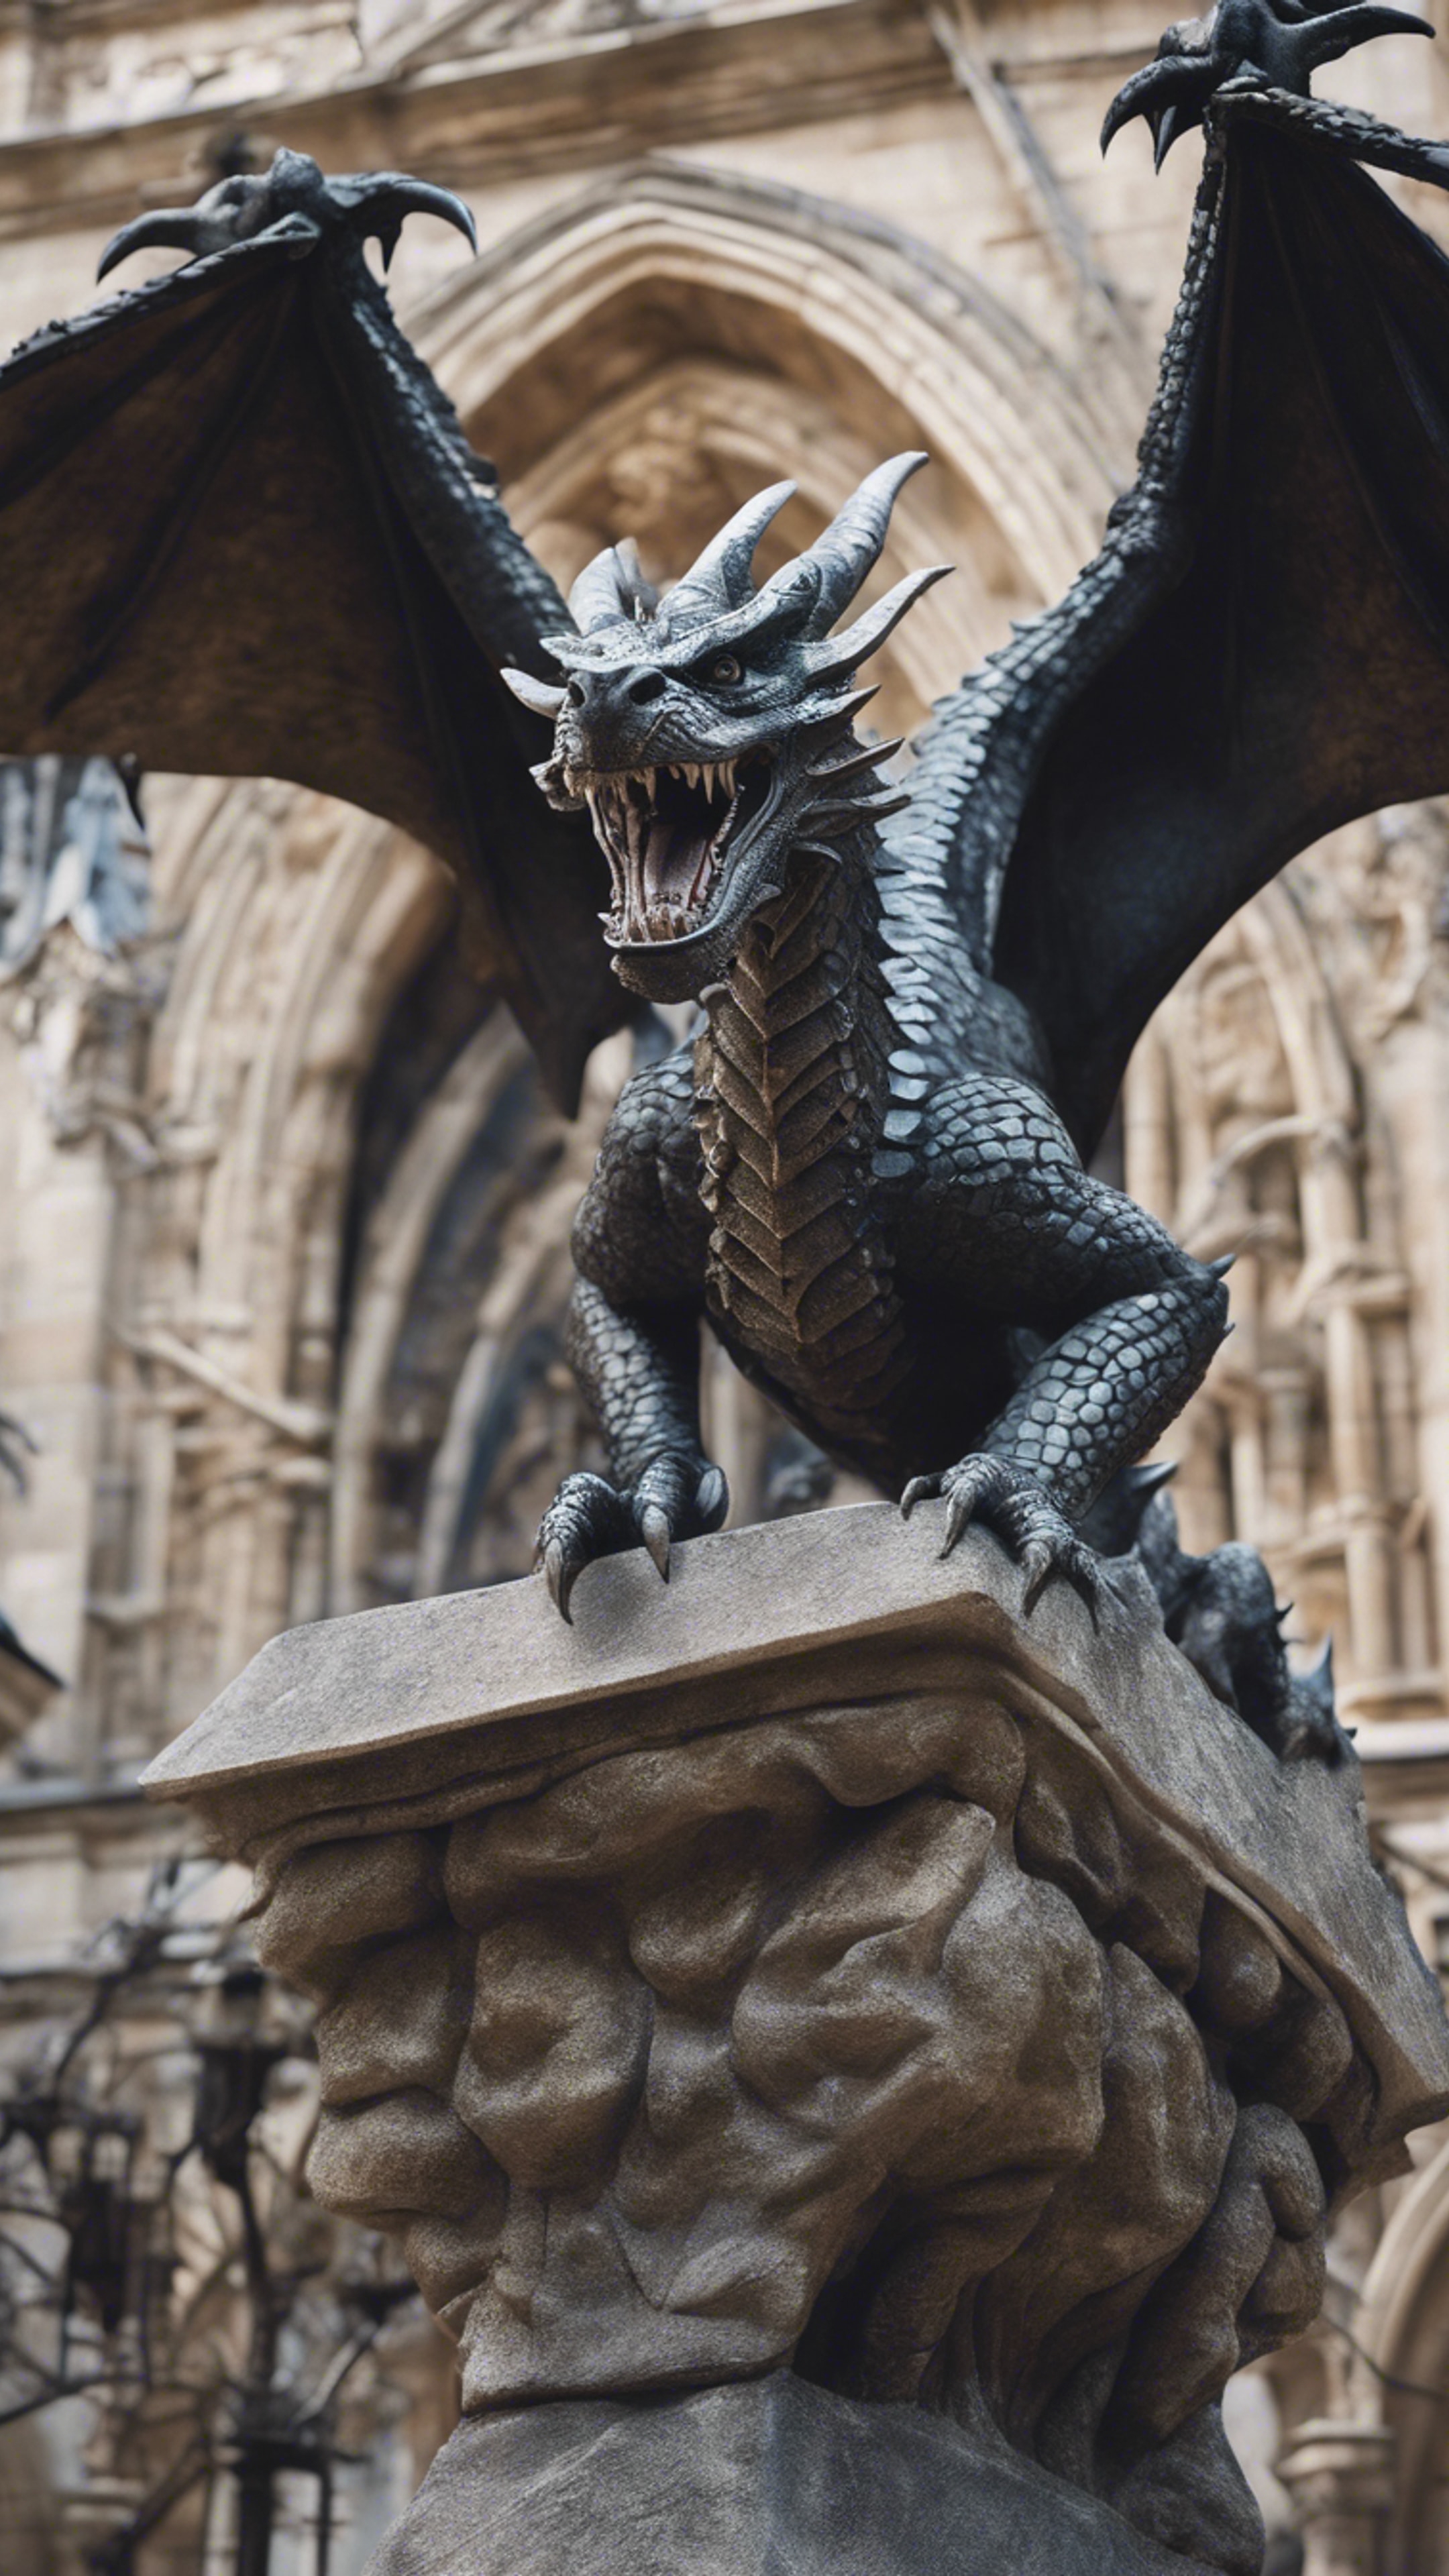 A stone dragon coming to life from the sculpture in a gothic cathedral's courtyard. Wallpaper[86d9df9db55943e58db6]